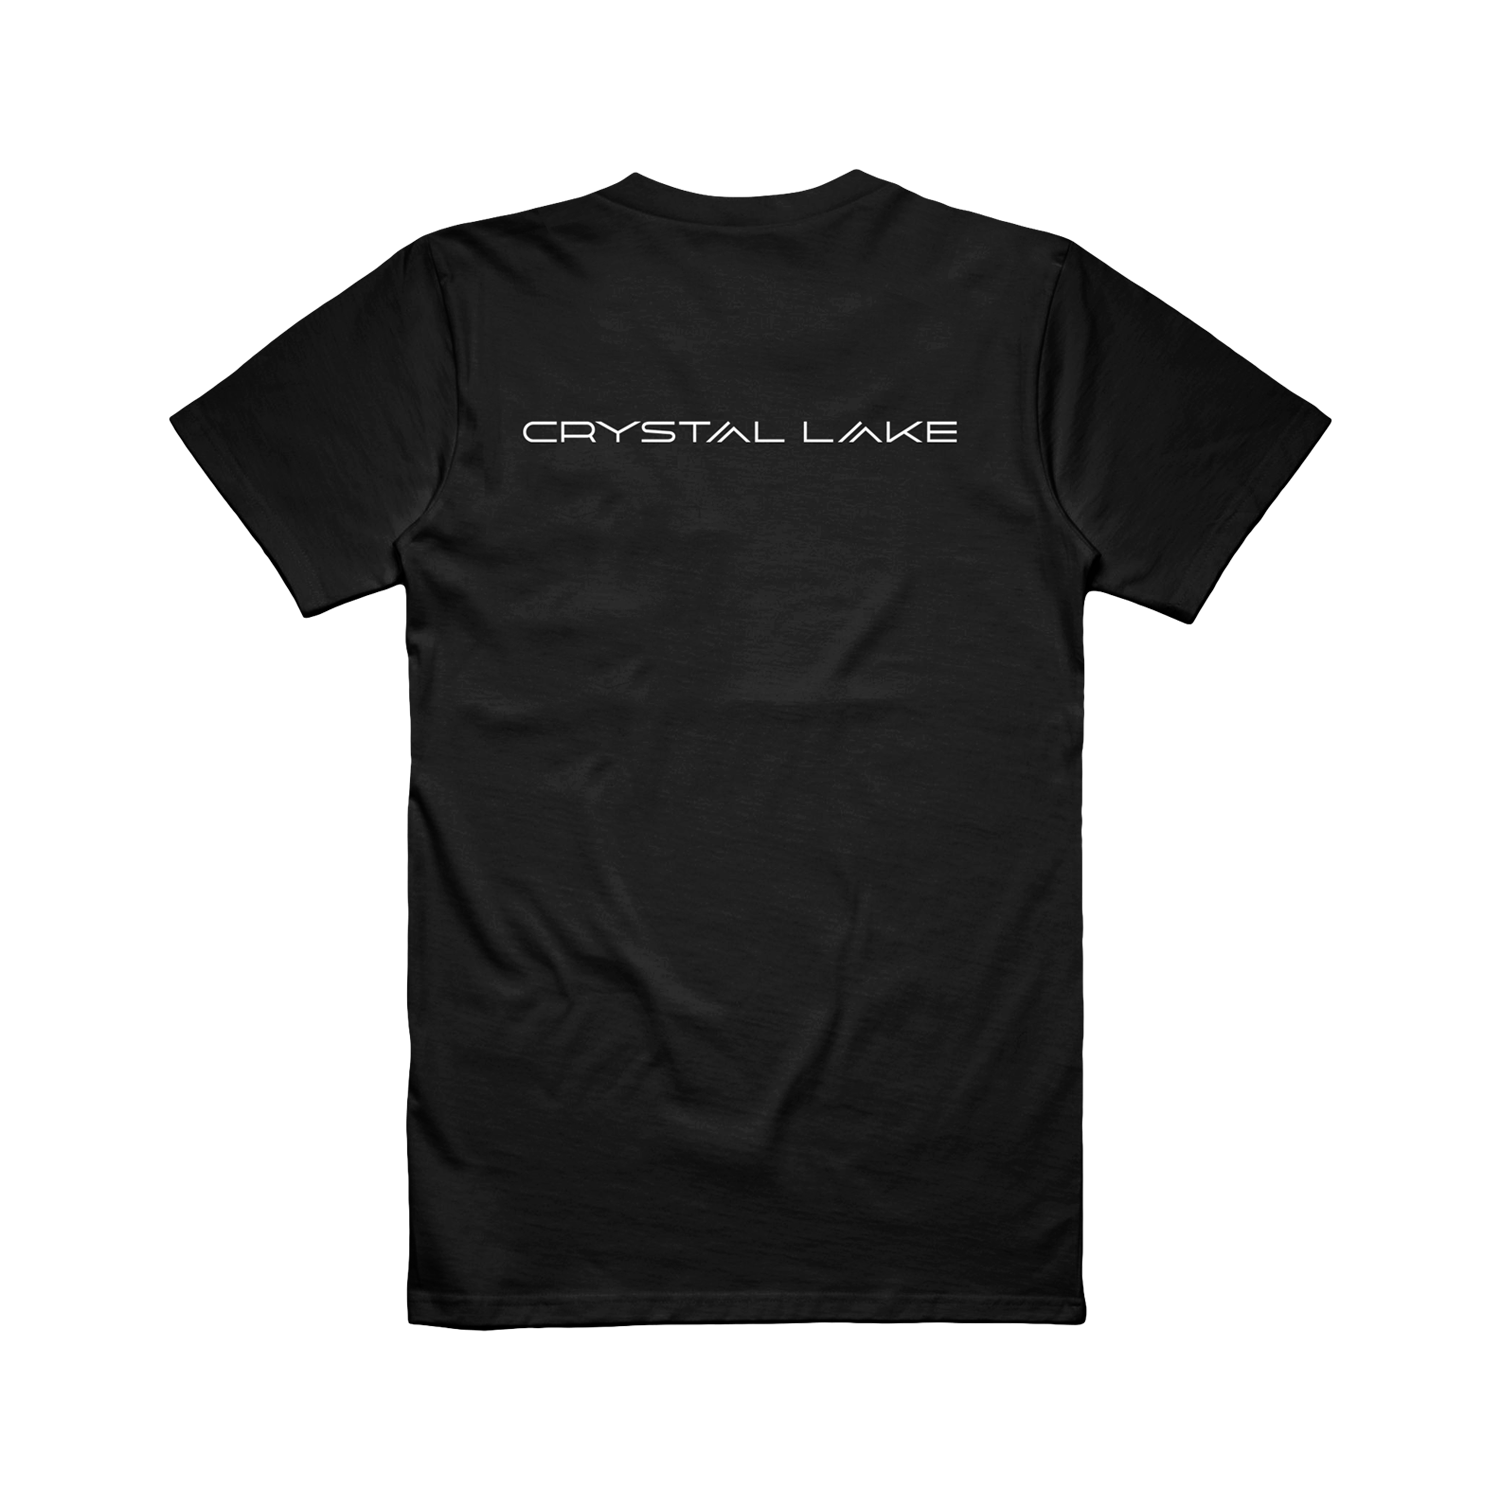 Crystal Lake - Helix and Chill Tee